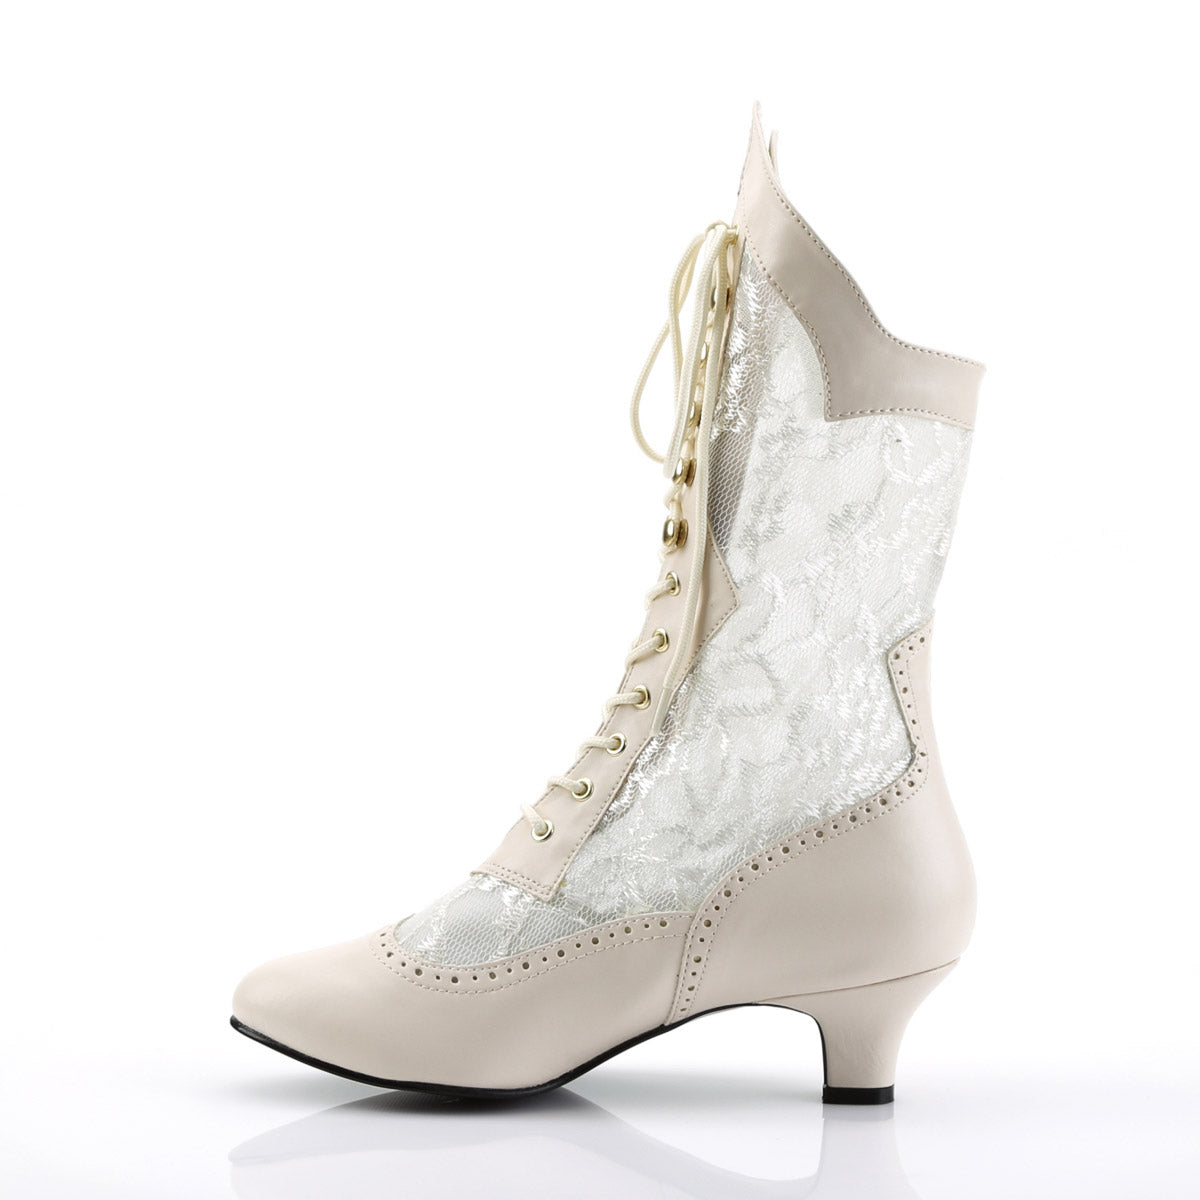 Sexy Lace Victorian Mid Calf Ankle Booties Kitten Heels Boots Shoes Pleaser Funtasma DAME/115